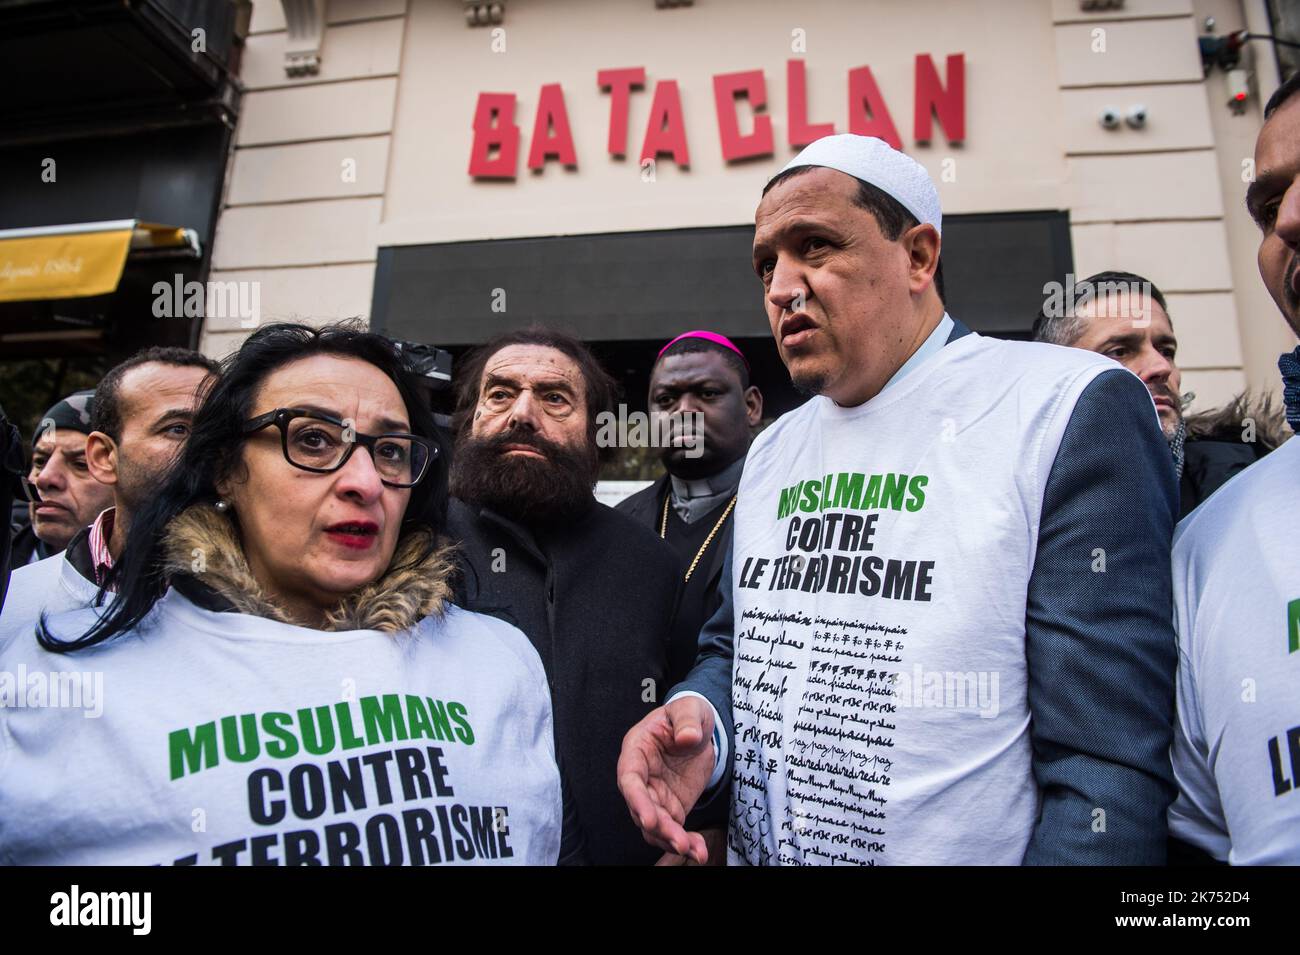 Imam Hassen Chalghoumi (R) and French author Marek Halter (L) gather with a group dubbed 'Muslims against Terrorism'  in front of the  Bataclan concert venue during a ceremony marking the second anniversary of the Paris attacks of November 2015 in which 130 people were killed.  Stock Photo